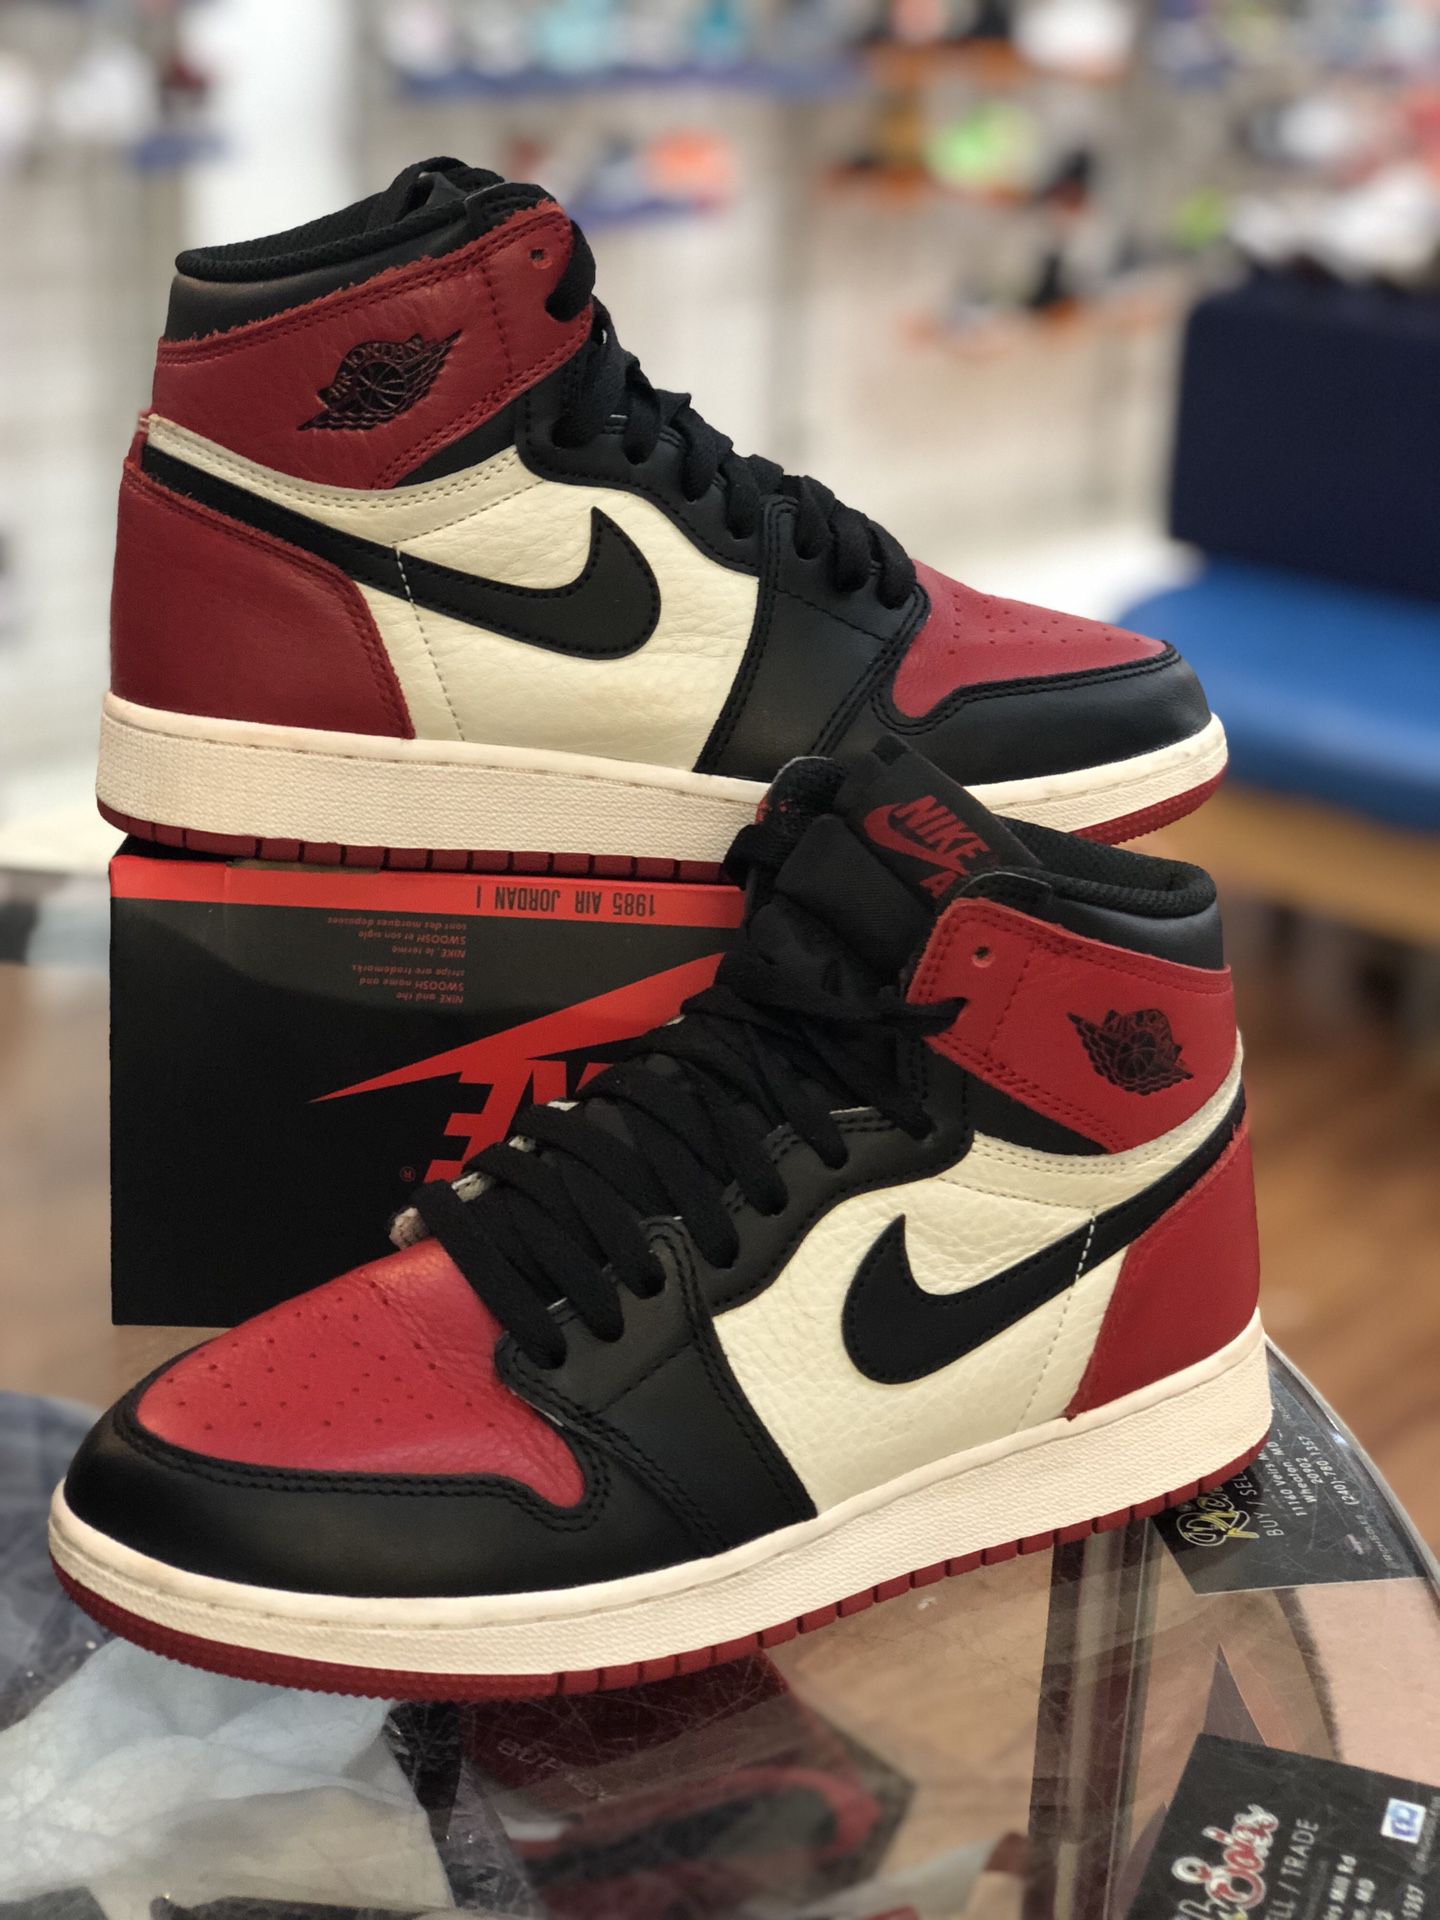 Bred toe 1s size 6.5